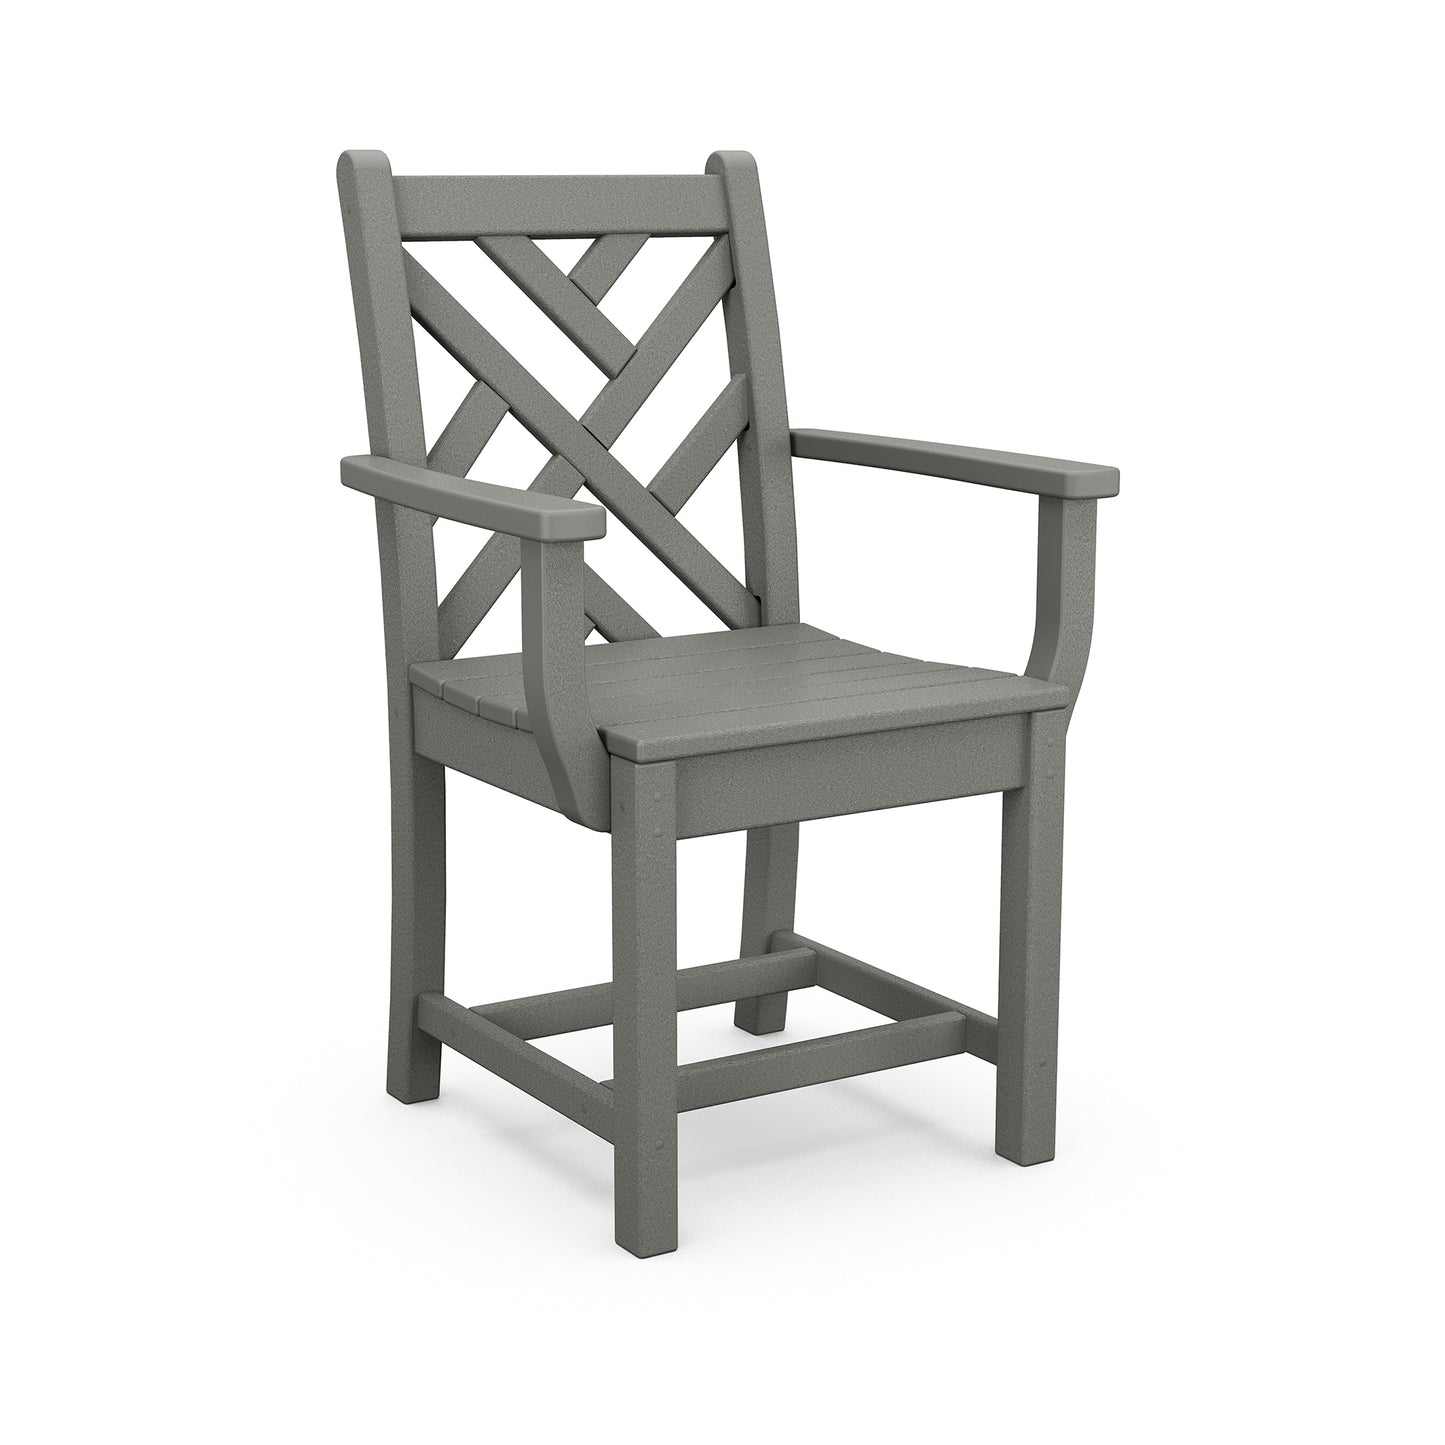 A gray POLYWOOD® Chippendale Outdoor Dining Arm Chair with a crisscross pattern on the backrest, armrests, and four sturdy legs, isolated on a white background.